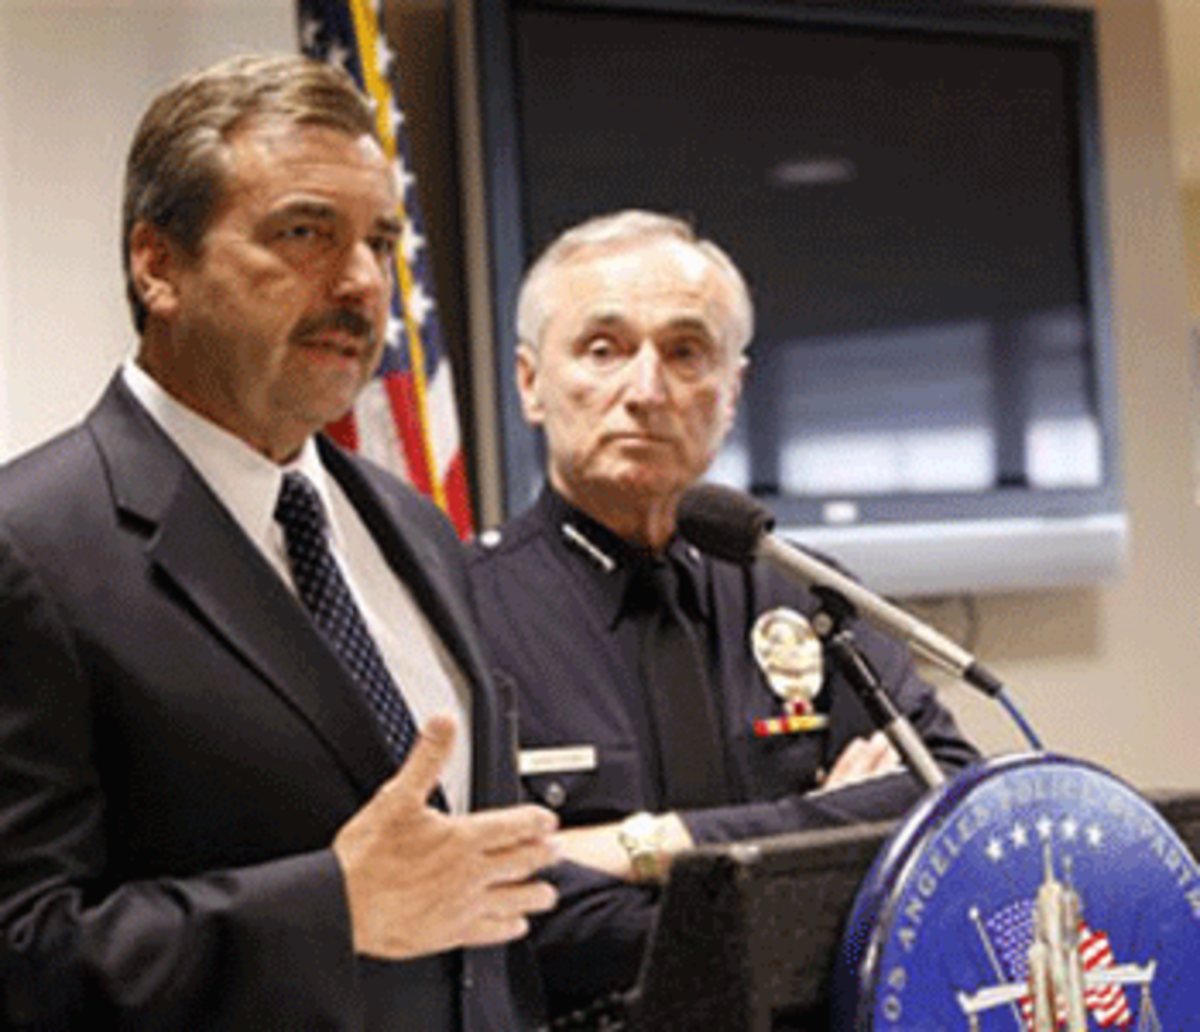 Incoming and outgoing LAPD Chiefs, Charlie Beck and Bill Bratton (Photo/Nick Ut)